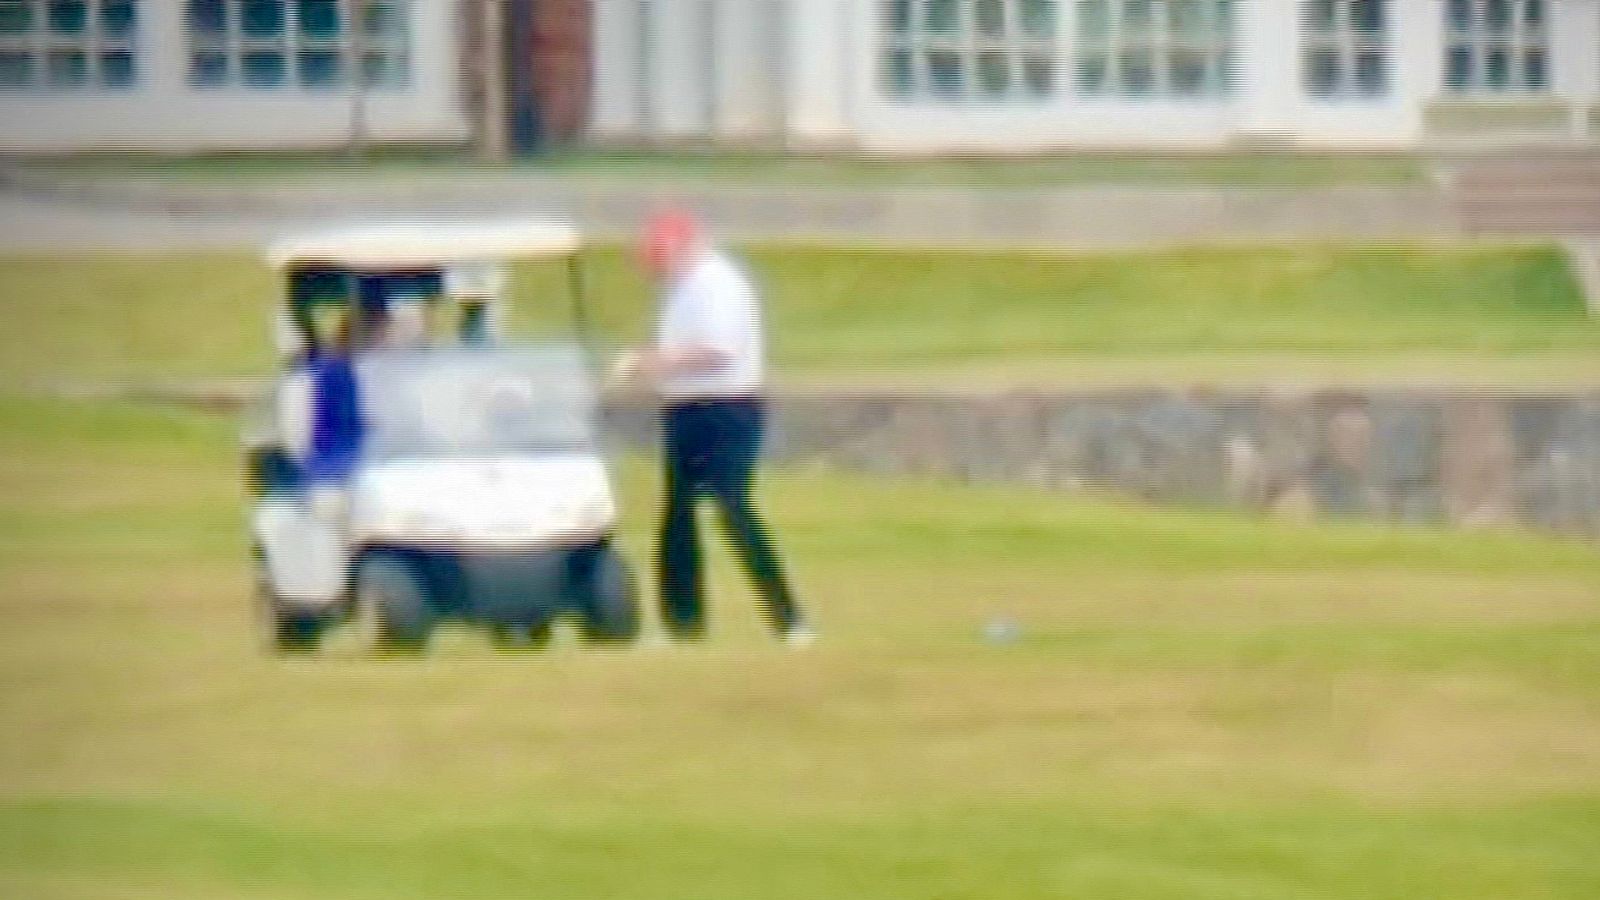 Trump plays golf as indictment unsealed. How worried should he be?